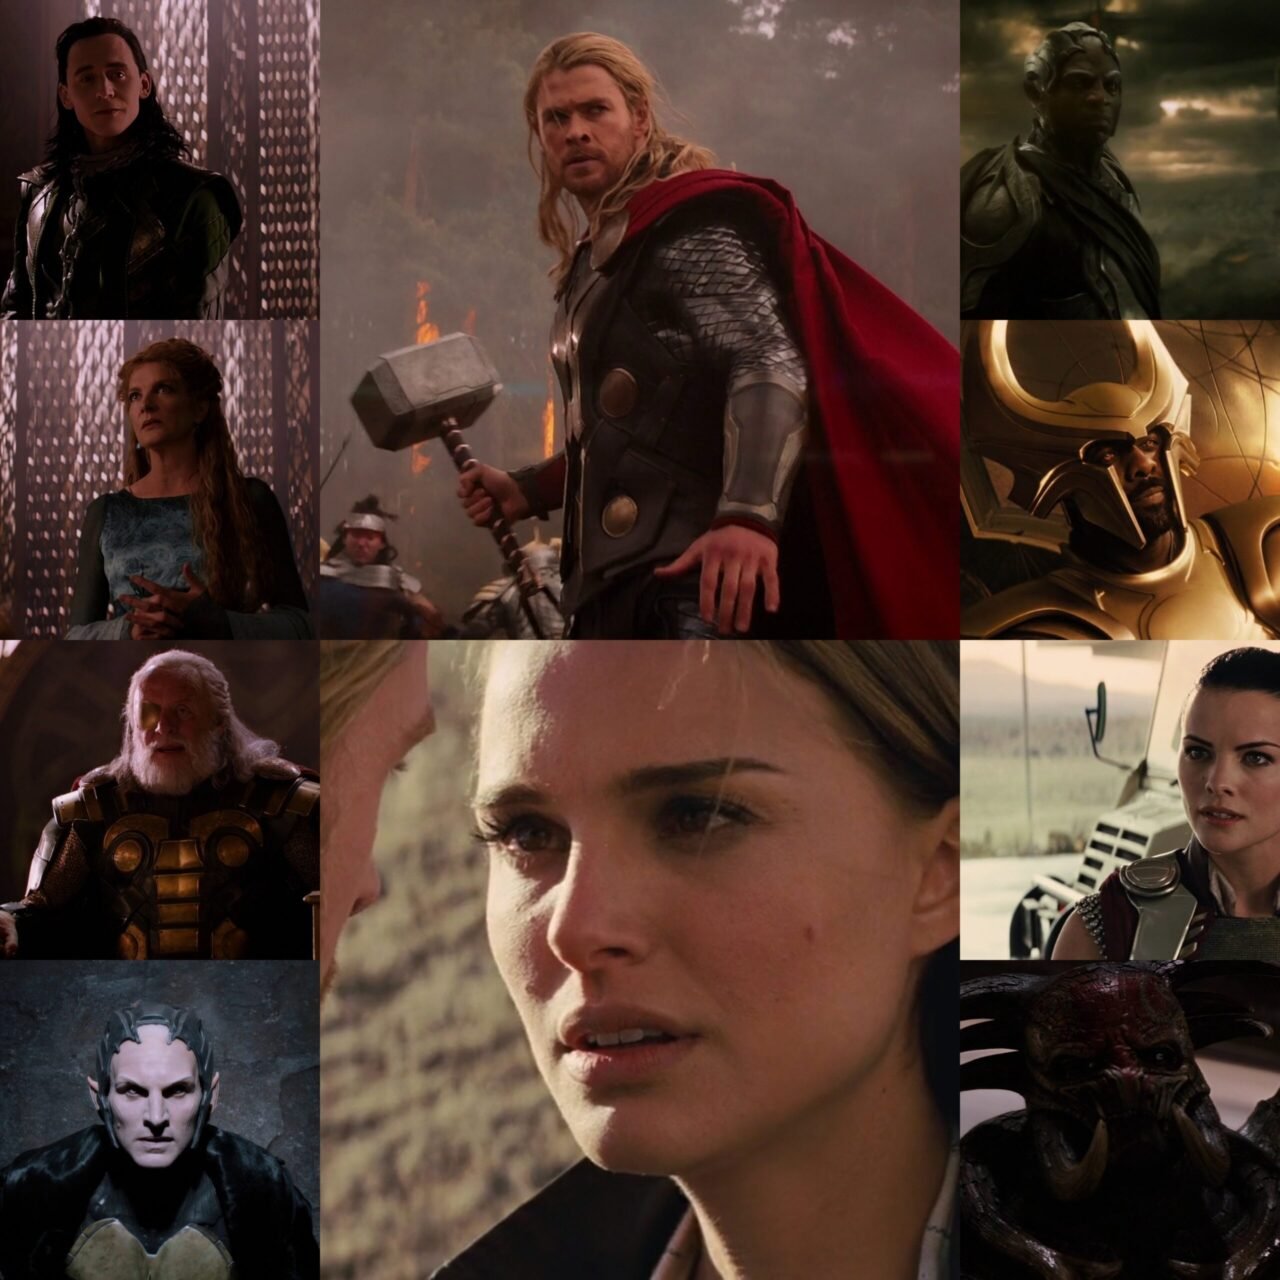 Thor The Dark World Cast, Villain, Box Office, Budget, DVD Release date, Director, Plot, Comics. Everything You Want To Know (Credit - Marvel Studios)